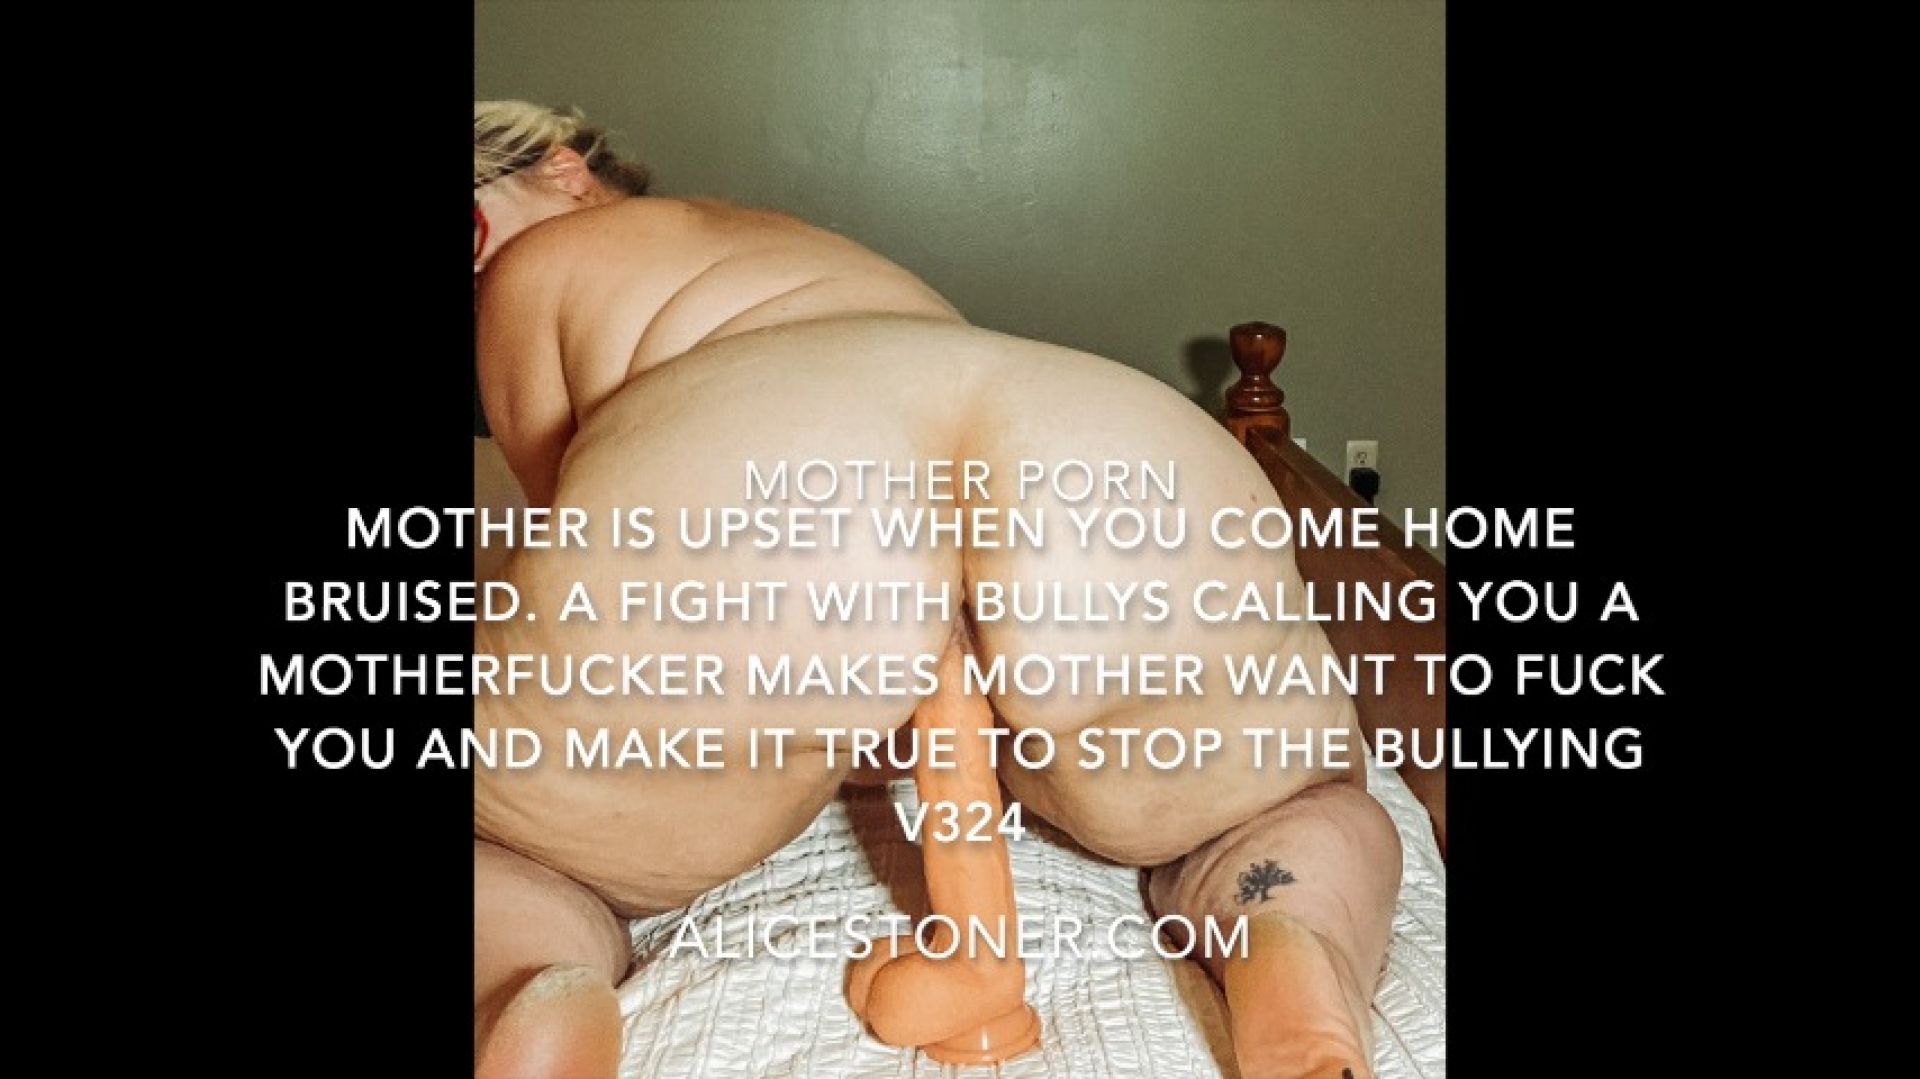 leaked 324 Mother and son fuck to make him a mother fucker thumbnail